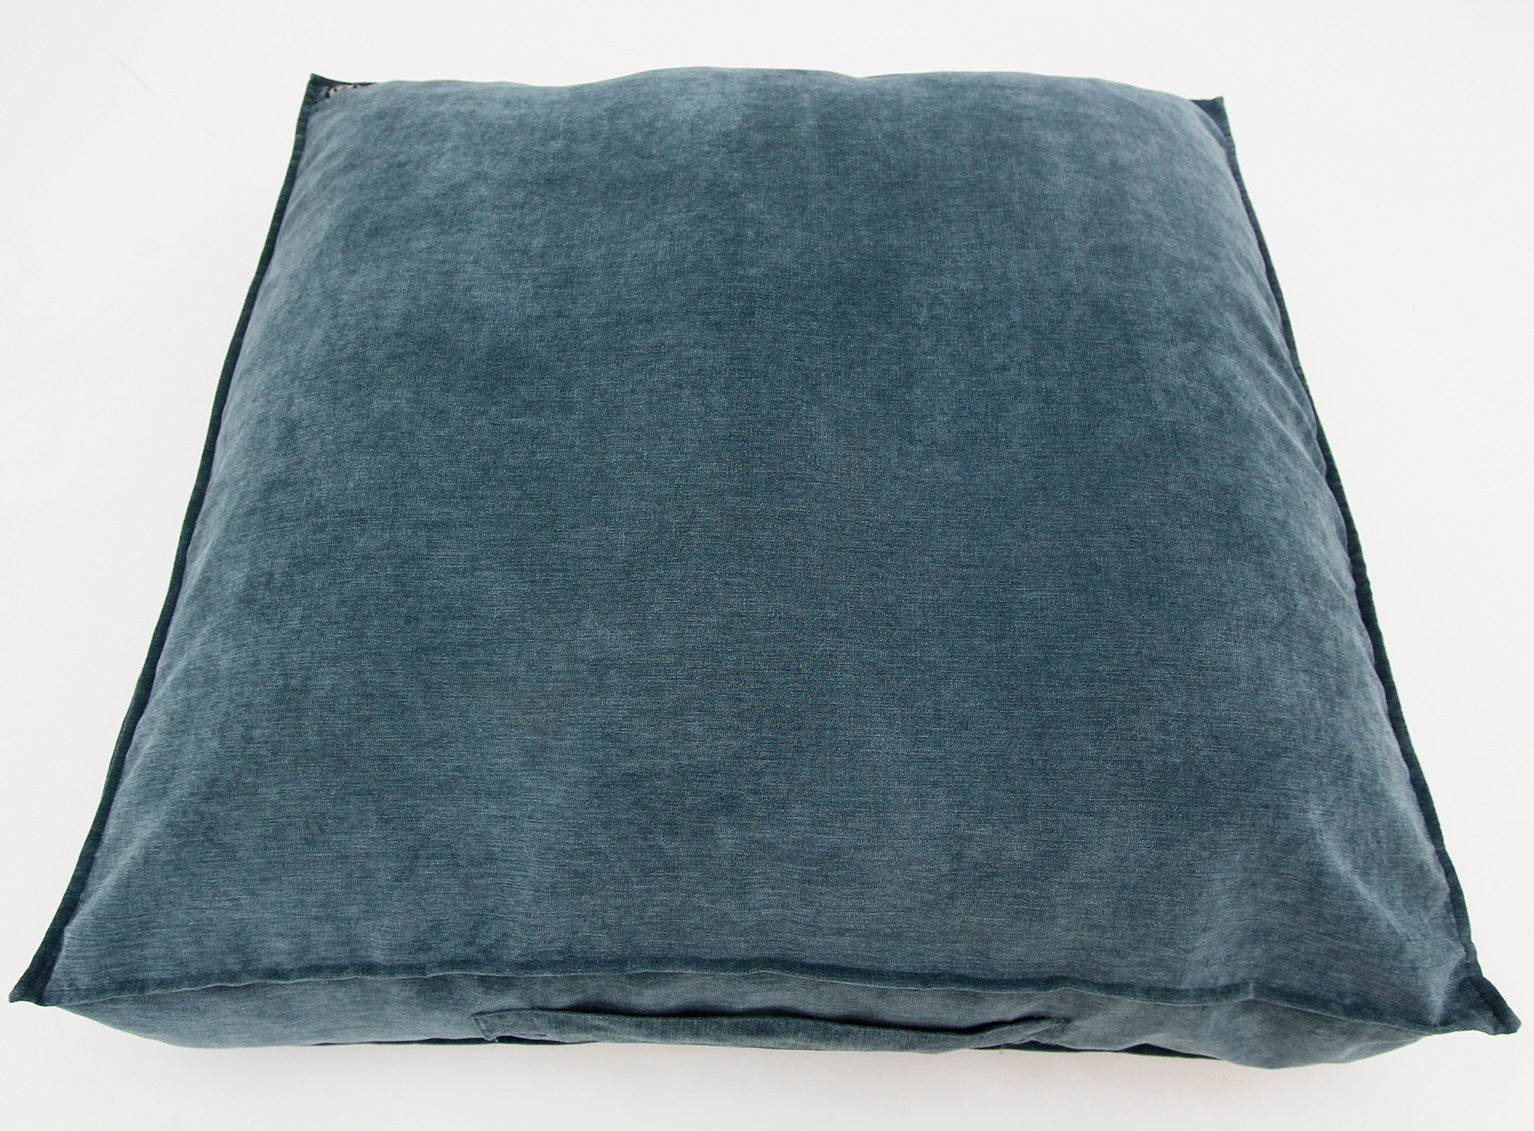 M Dog Bed Blue Extra Cover